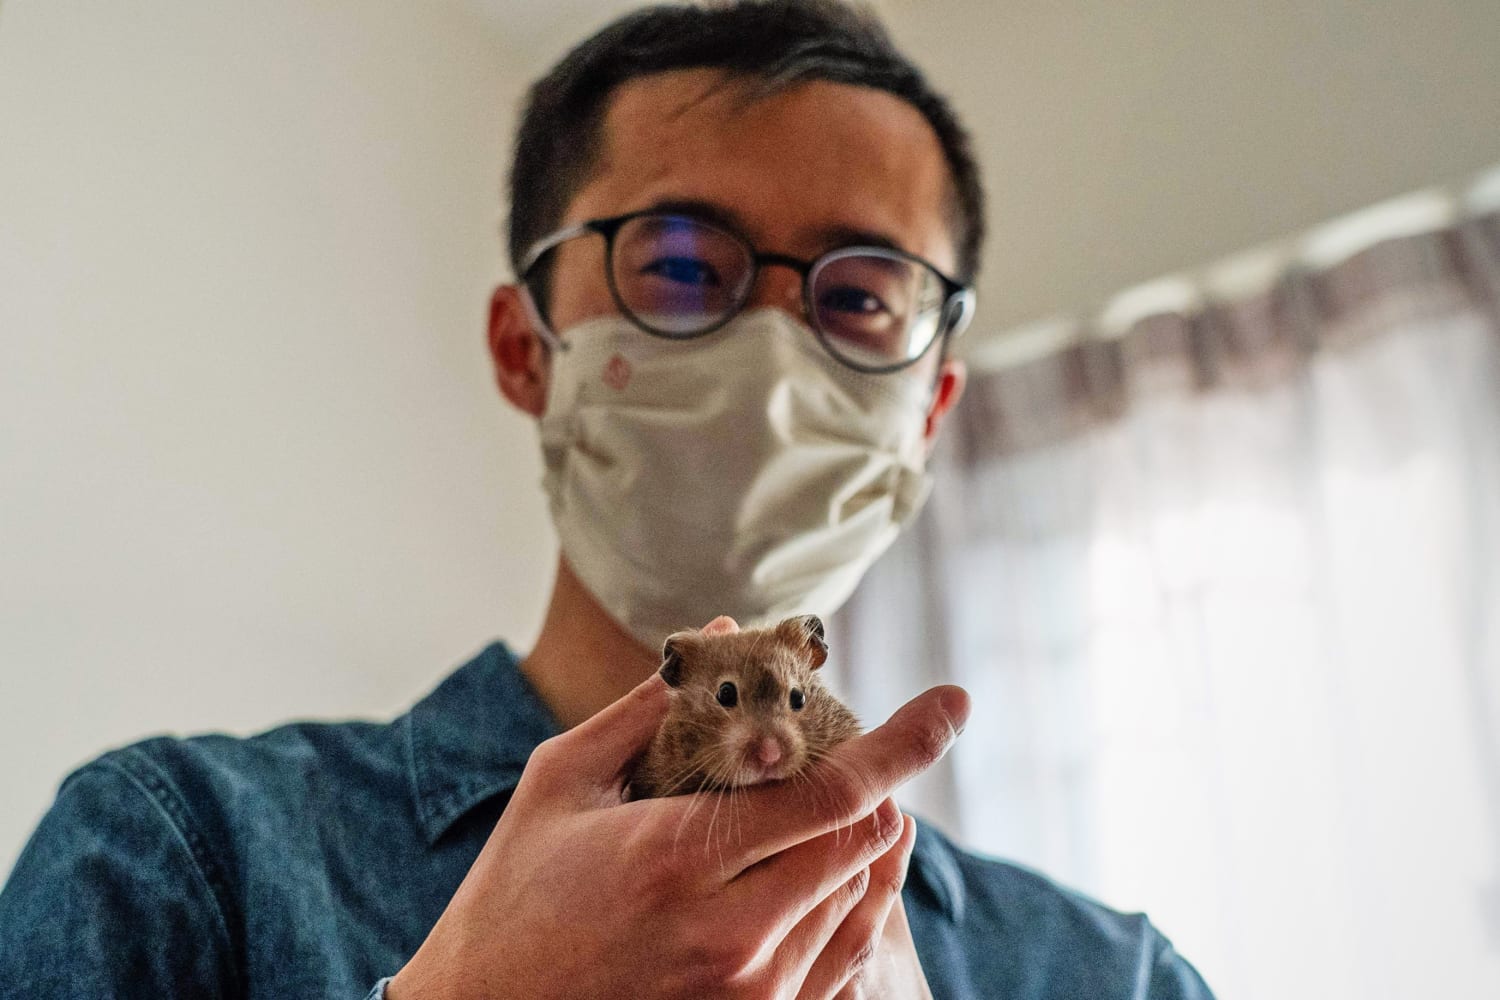 Hamsters and mail: New Covid threats in China, Hong Kong dismay residents and experts